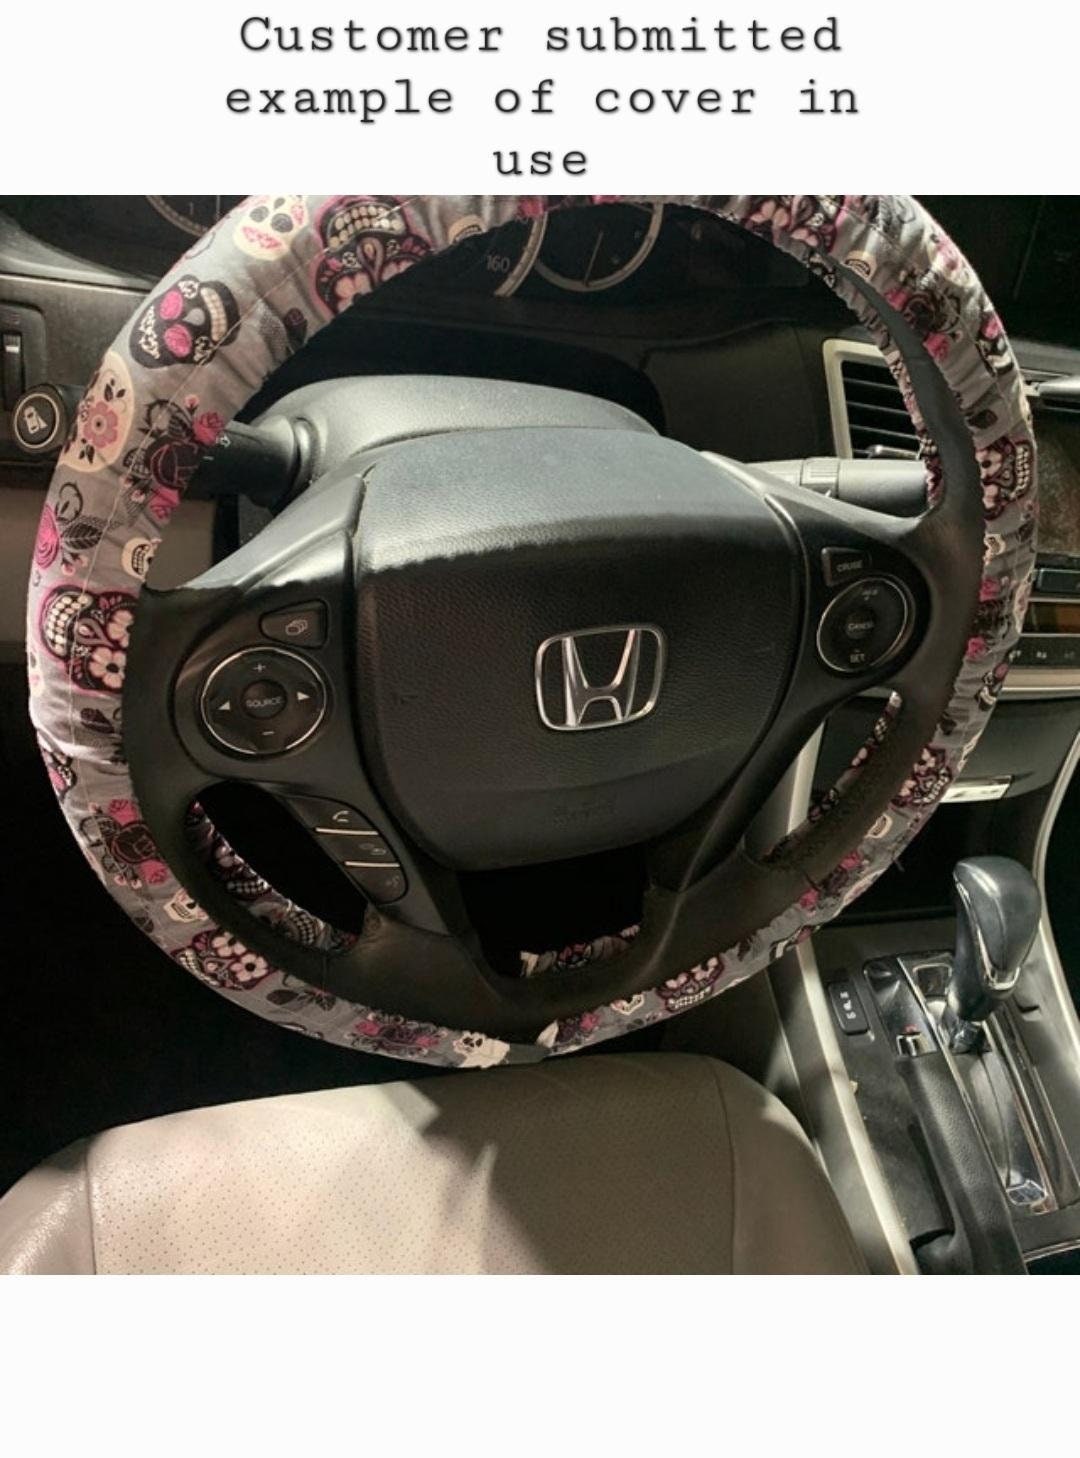 Cherry Shimmer Steering Wheel Cover, 100% Cotton, Washable, Custom Car Accessories - Harlow's Store and Garden Gifts